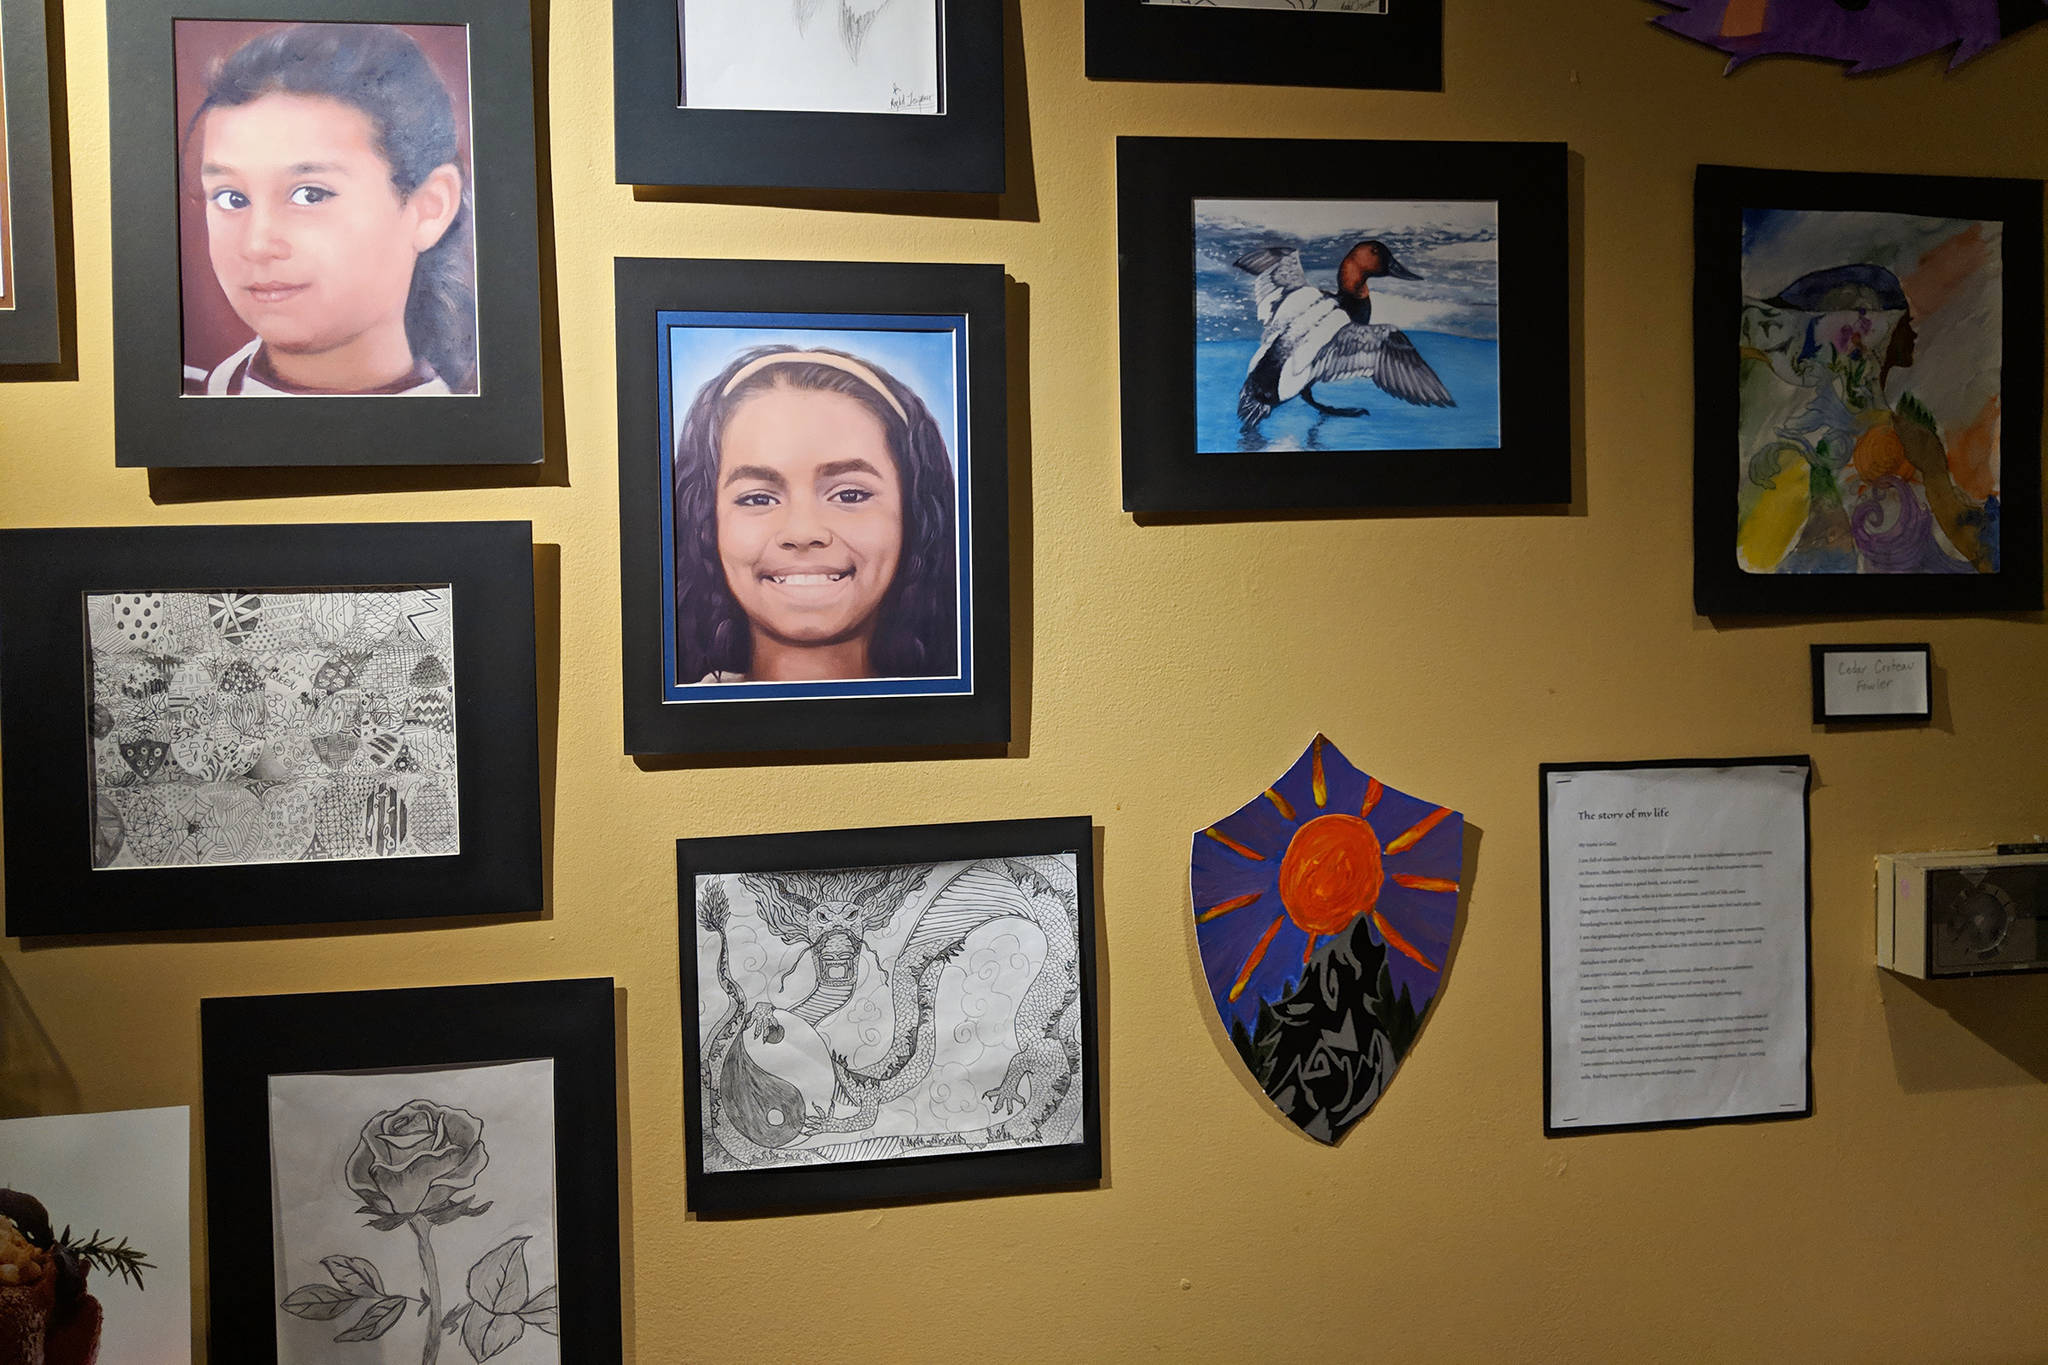 Artwork by Thunder Mountain High School students was displayed during the Juneau Youth Services student art show at Baranof Heritage Cafe on Friday, Dec. 7, 2018. (Ben Hohenstatt | Capital City Weekly)